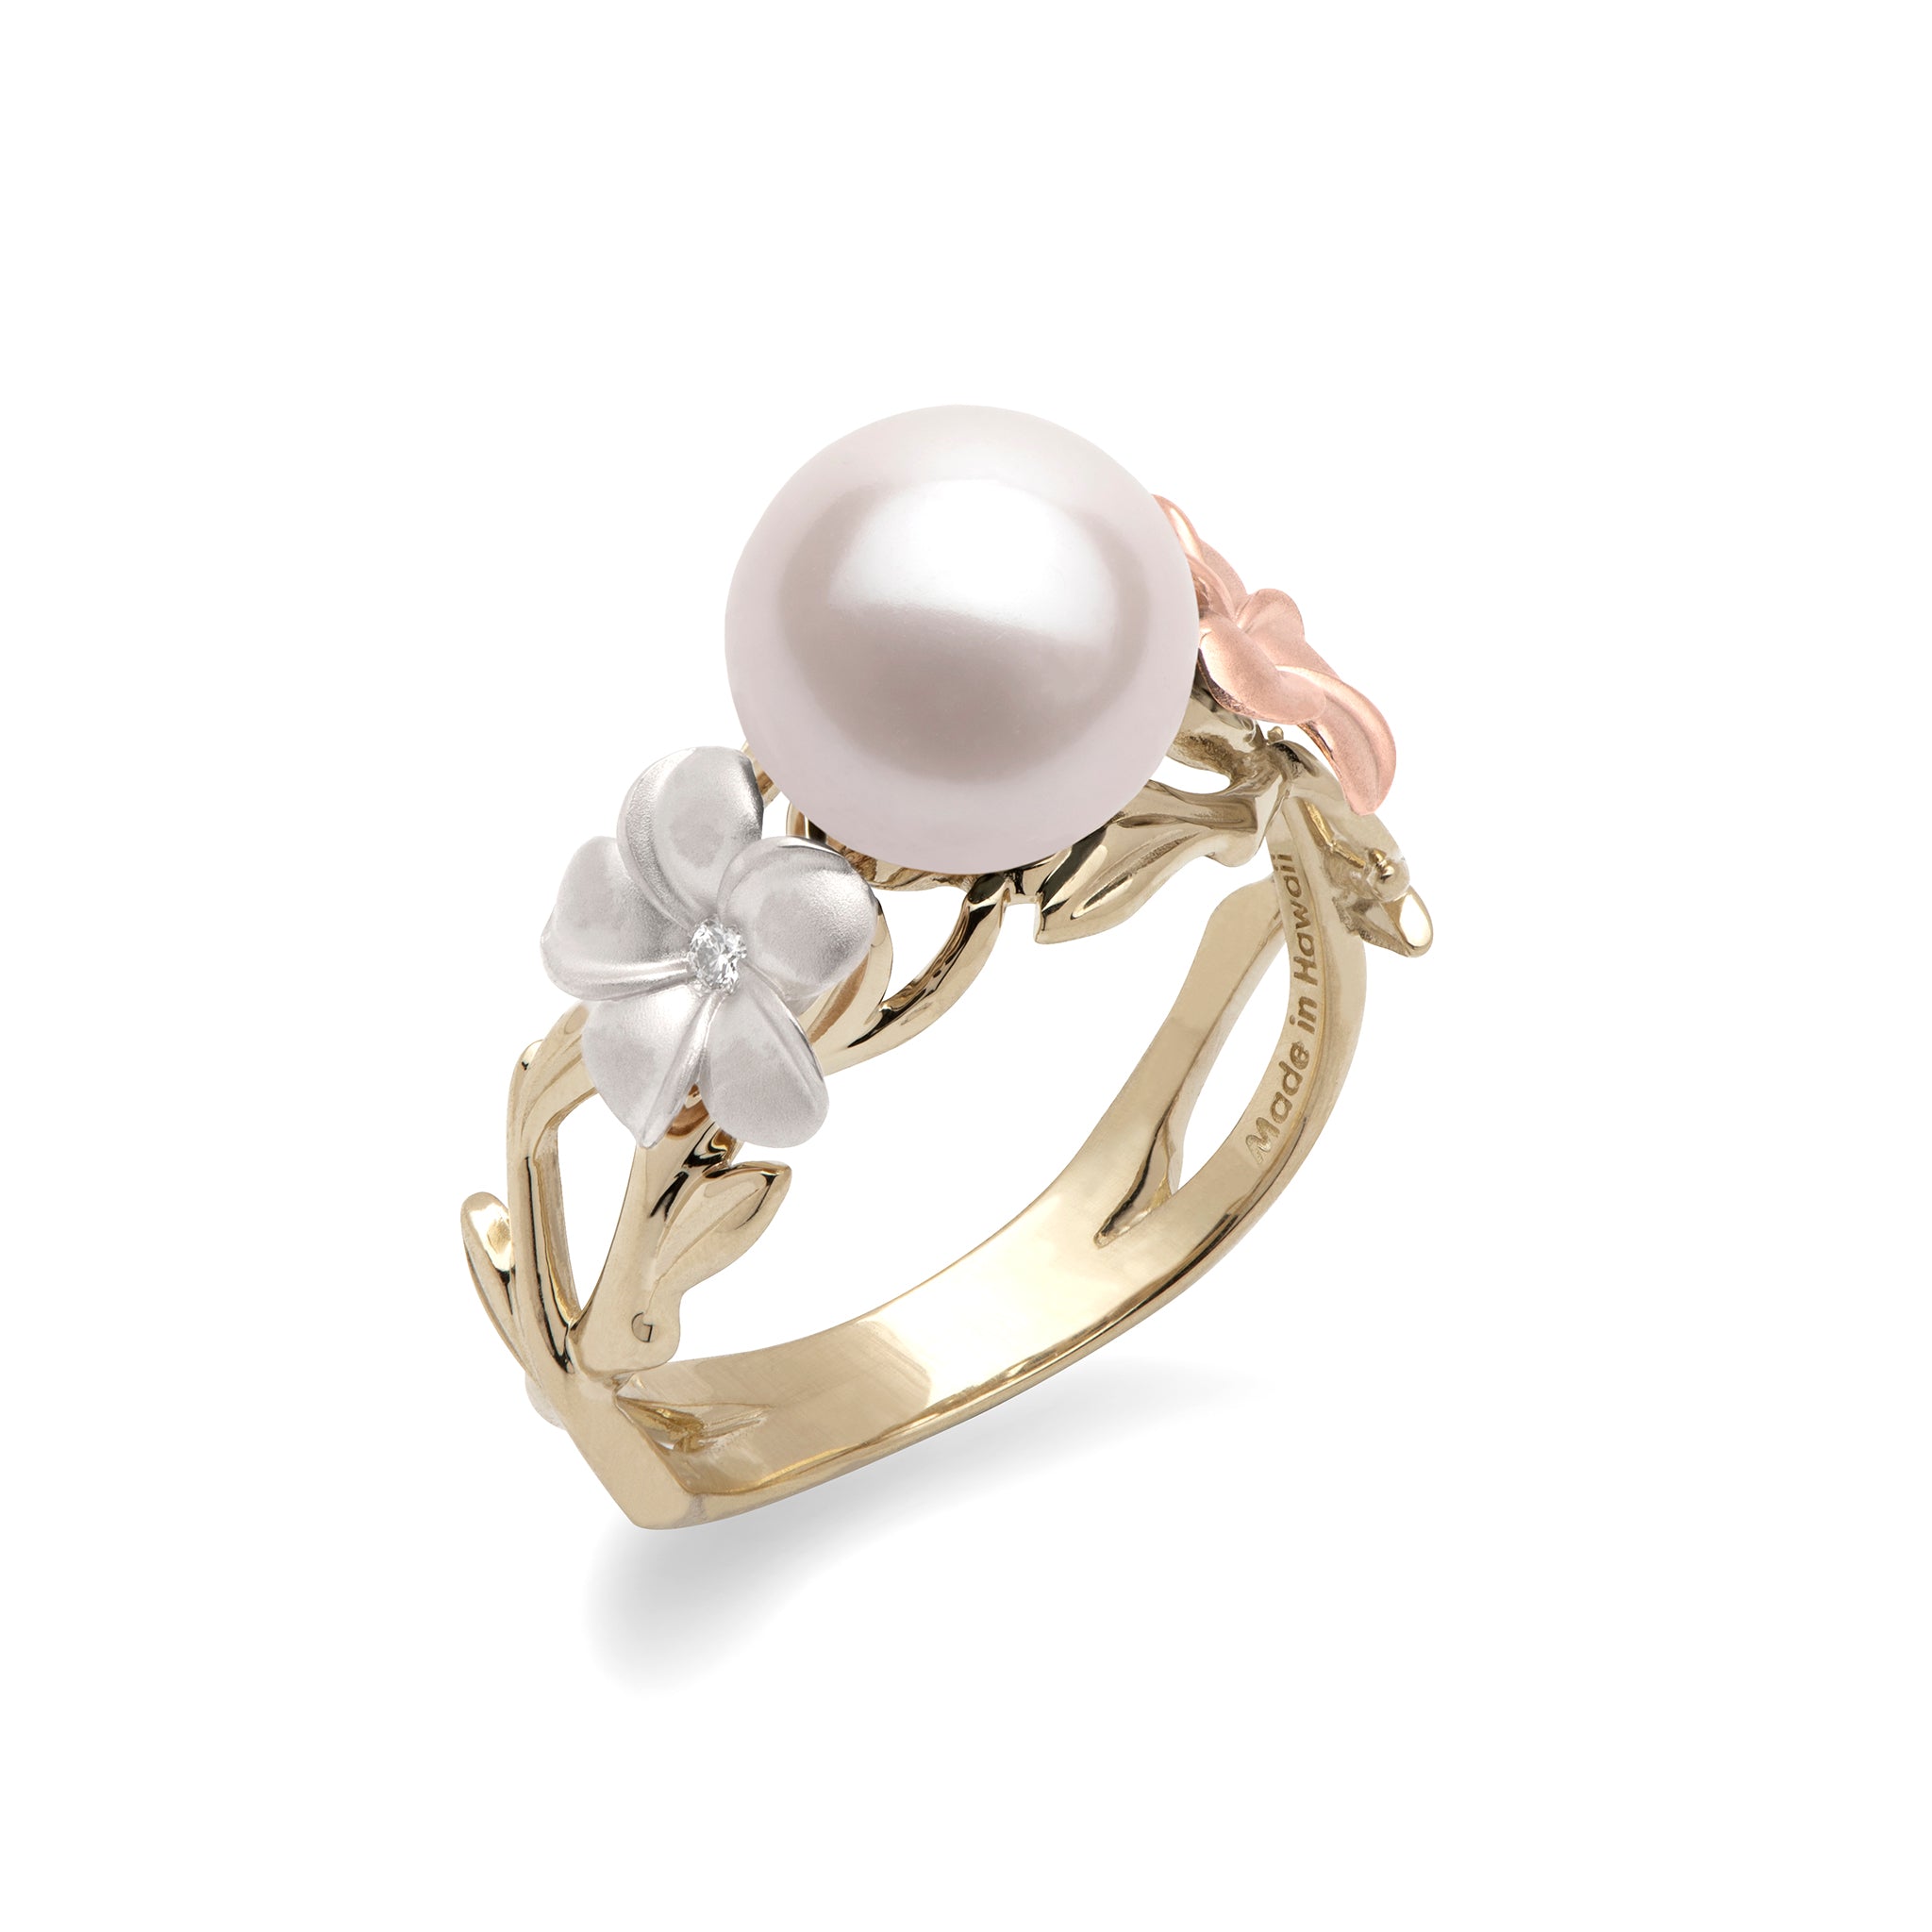 Pearls in Bloom Akoya Pearl Ring in Tri Color Gold with Diamonds - 8mm ...